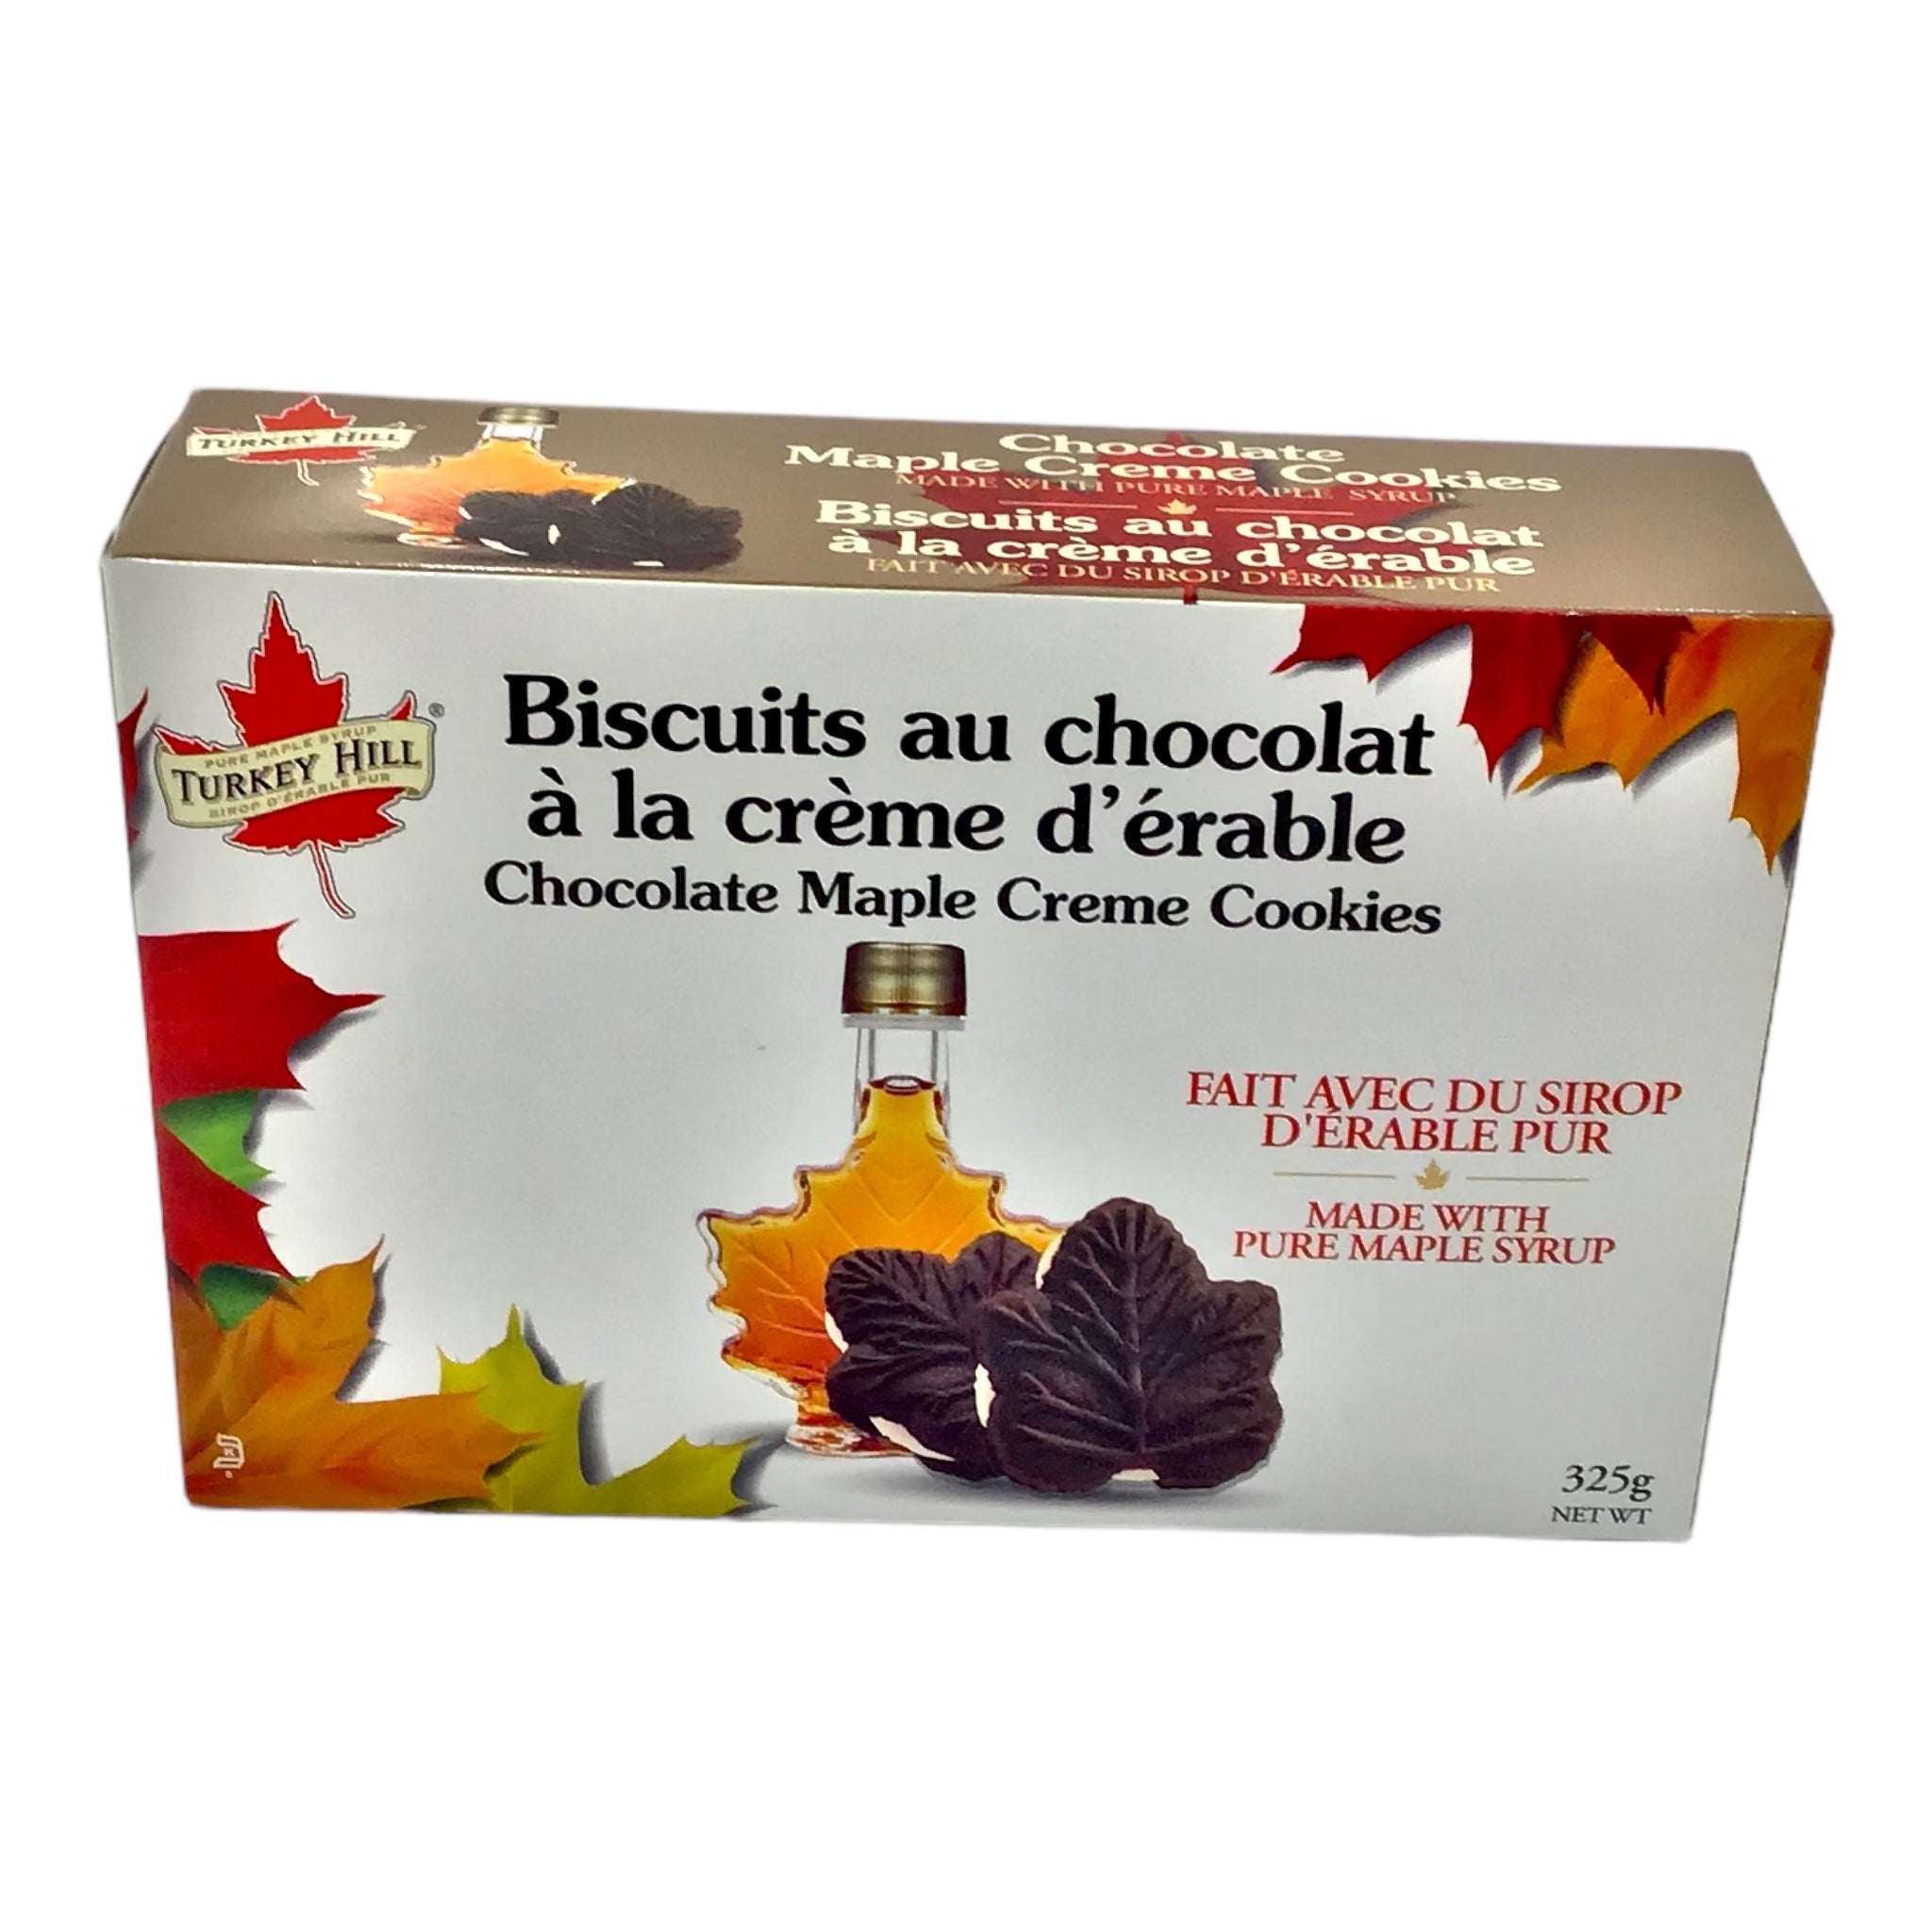 Turkey Hill's Chocolate Maple Cream Cookies (325g) are made in Canada.